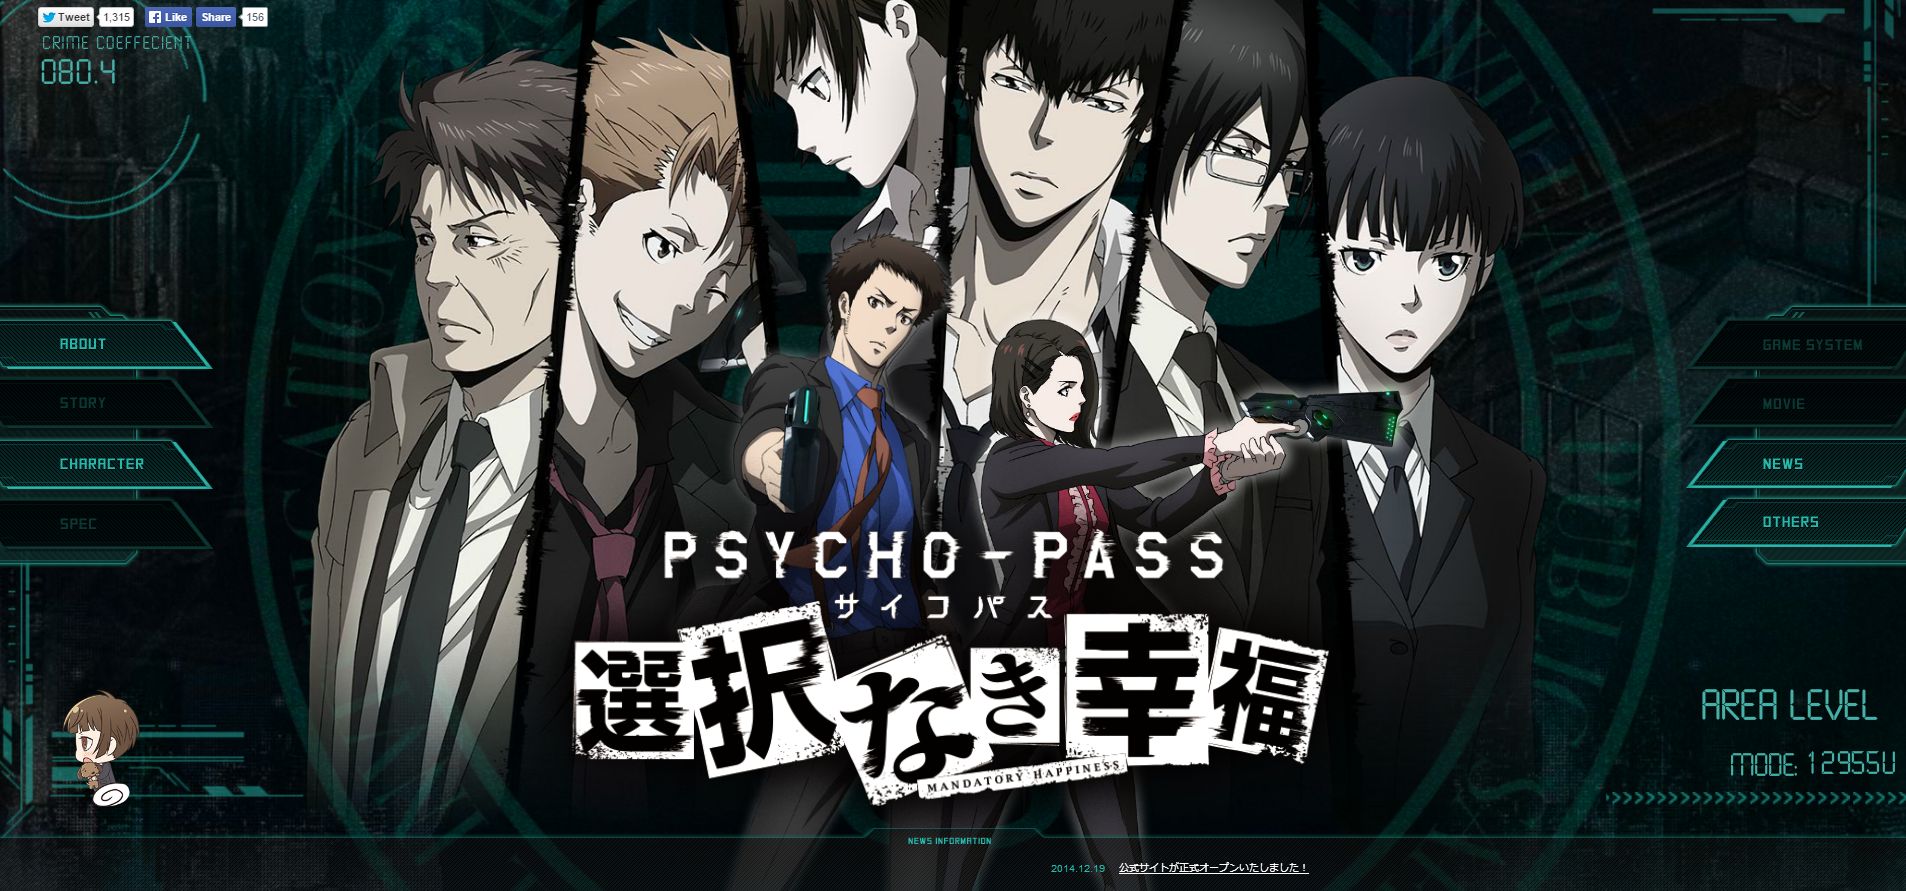 ANNOUNCED: “Psycho-Pass: Mandatory Happiness” Coming West! - 